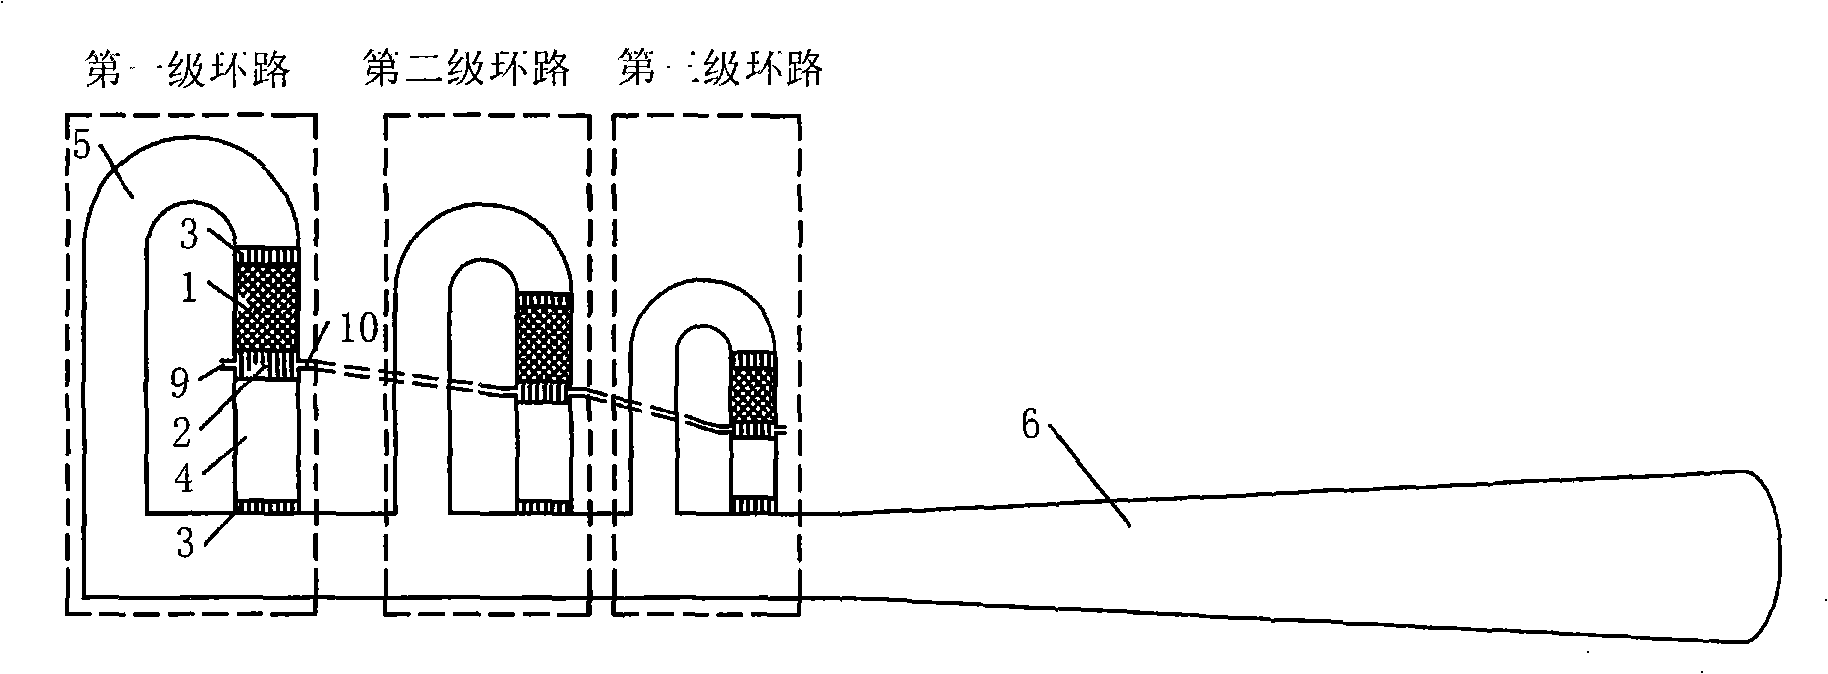 Thermo-acoustic engine system using temperature-variable heat source